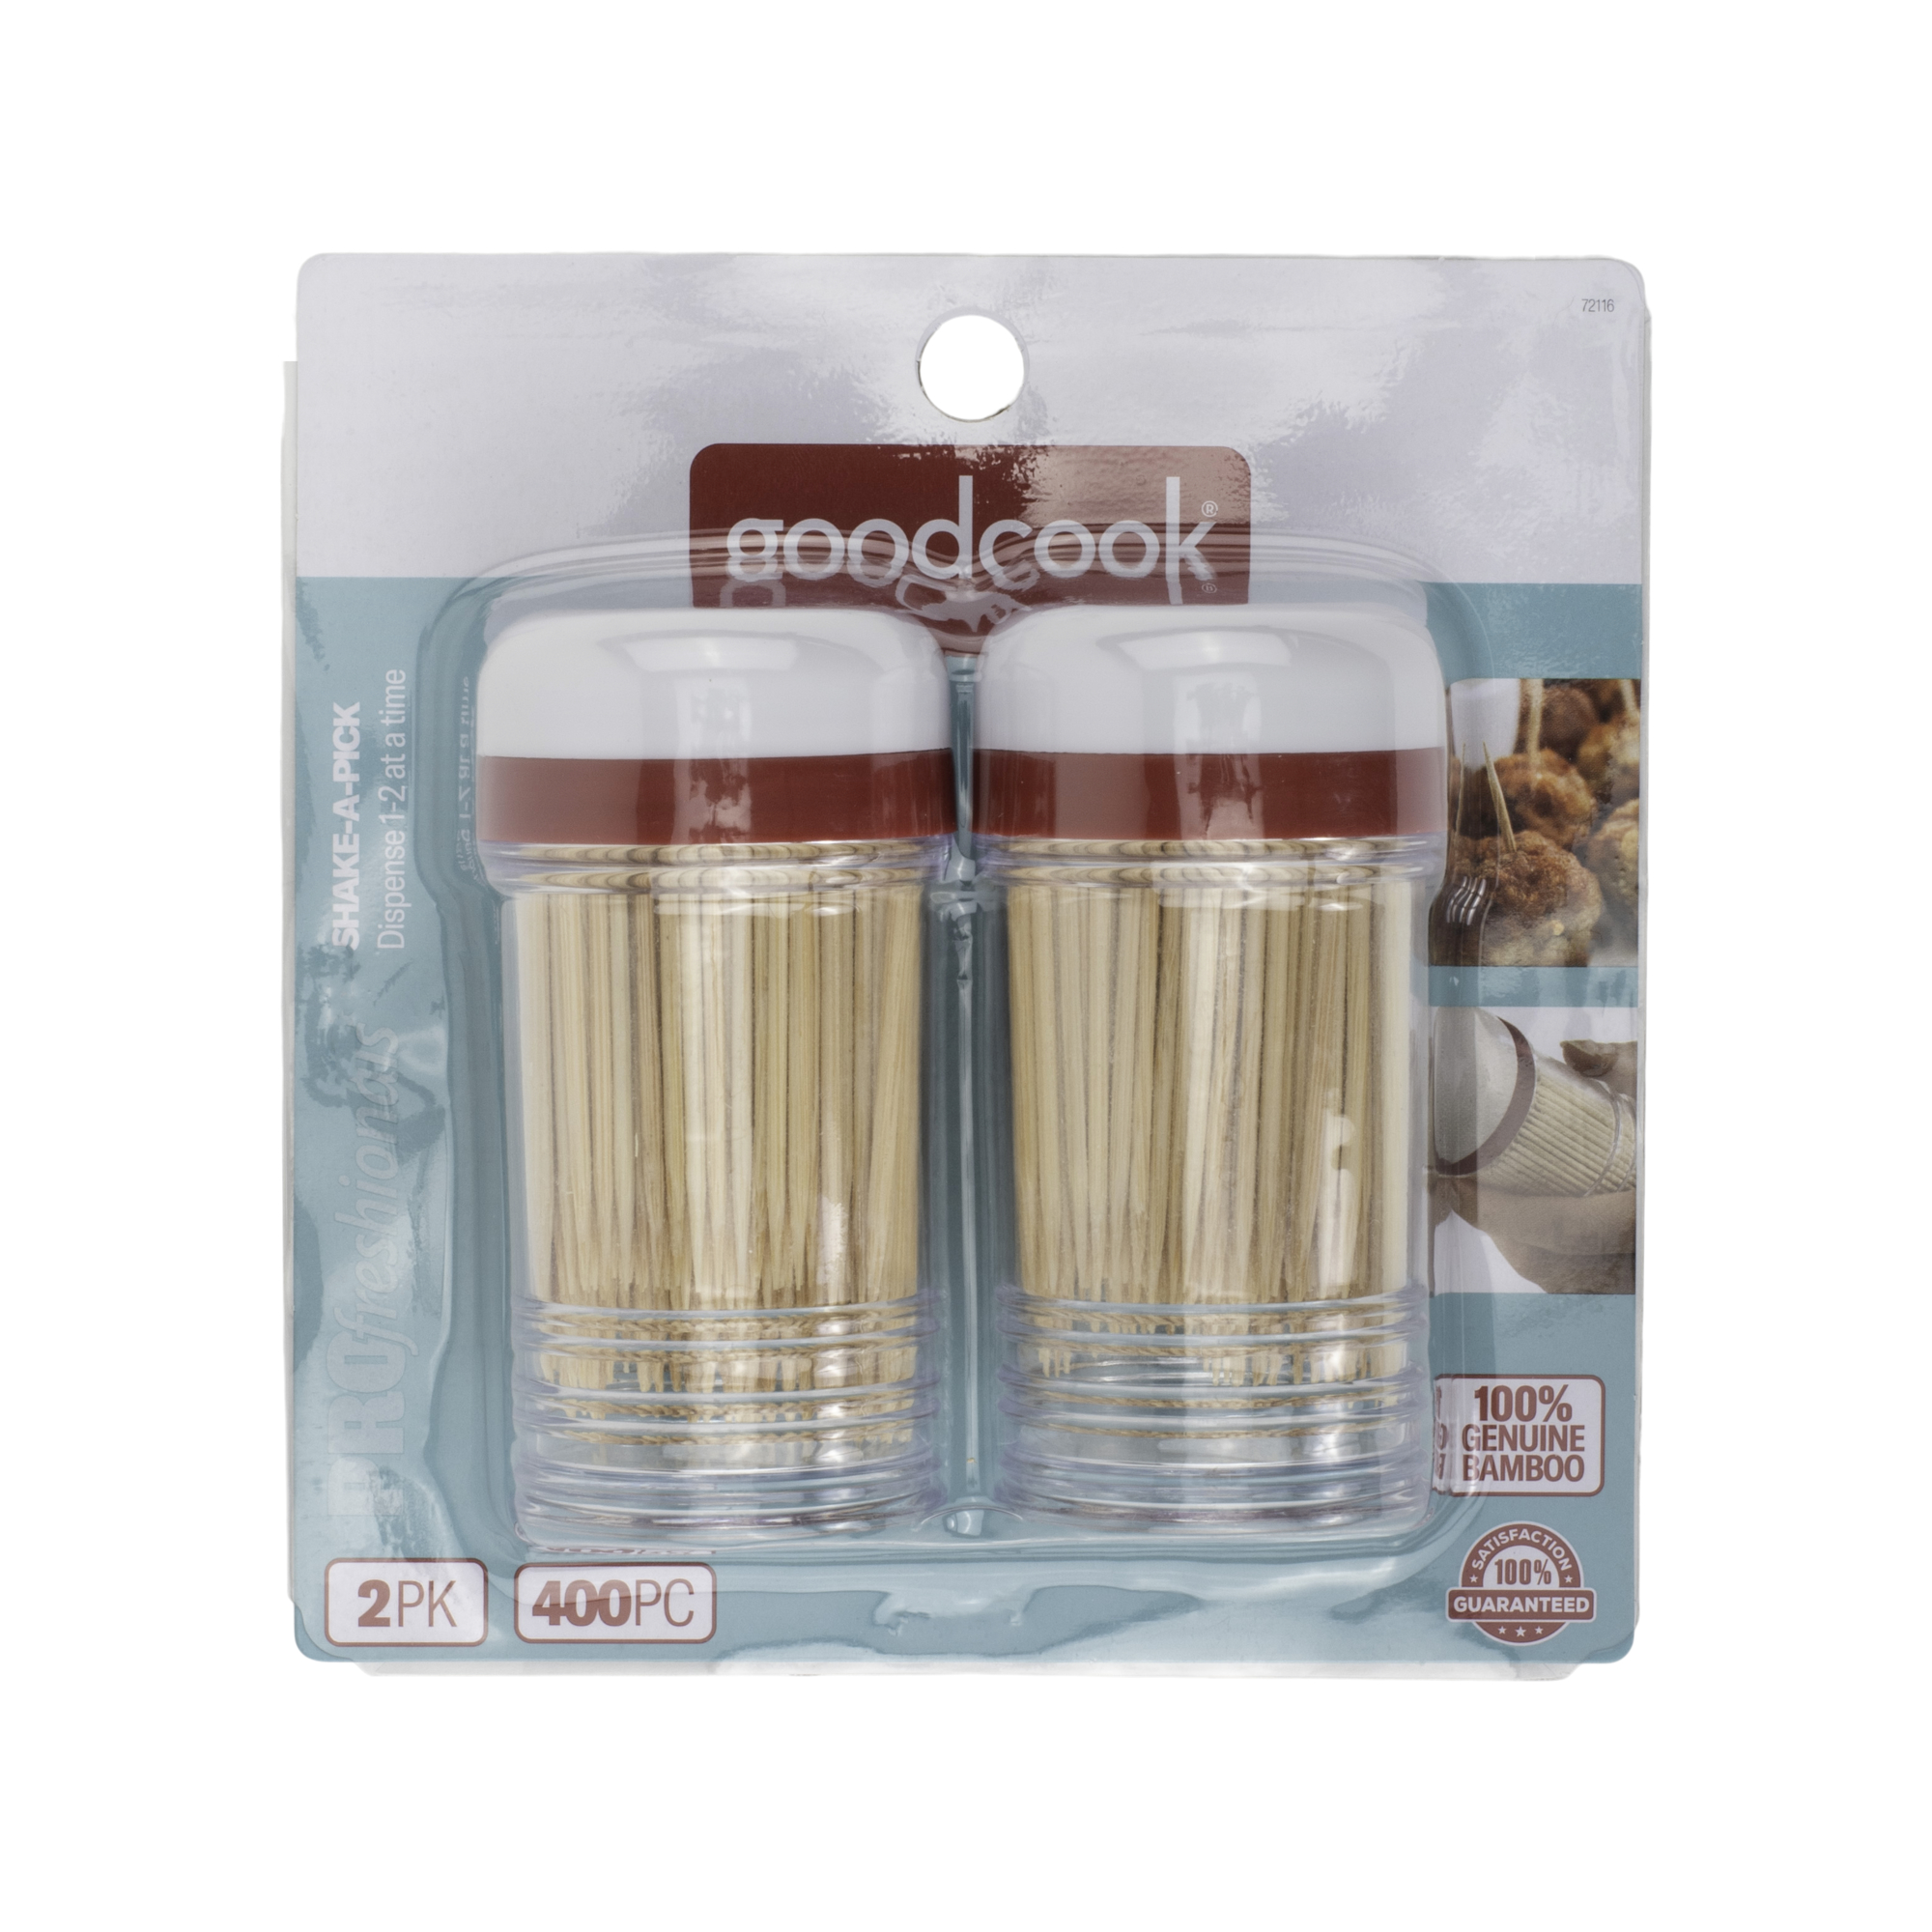 GoodCook PROfreshionals 2-Piece Shake-a-Pick Toothpick Dispenser Set with 400 Bamboo Toothpicks, 3.50" Height - image 4 of 5